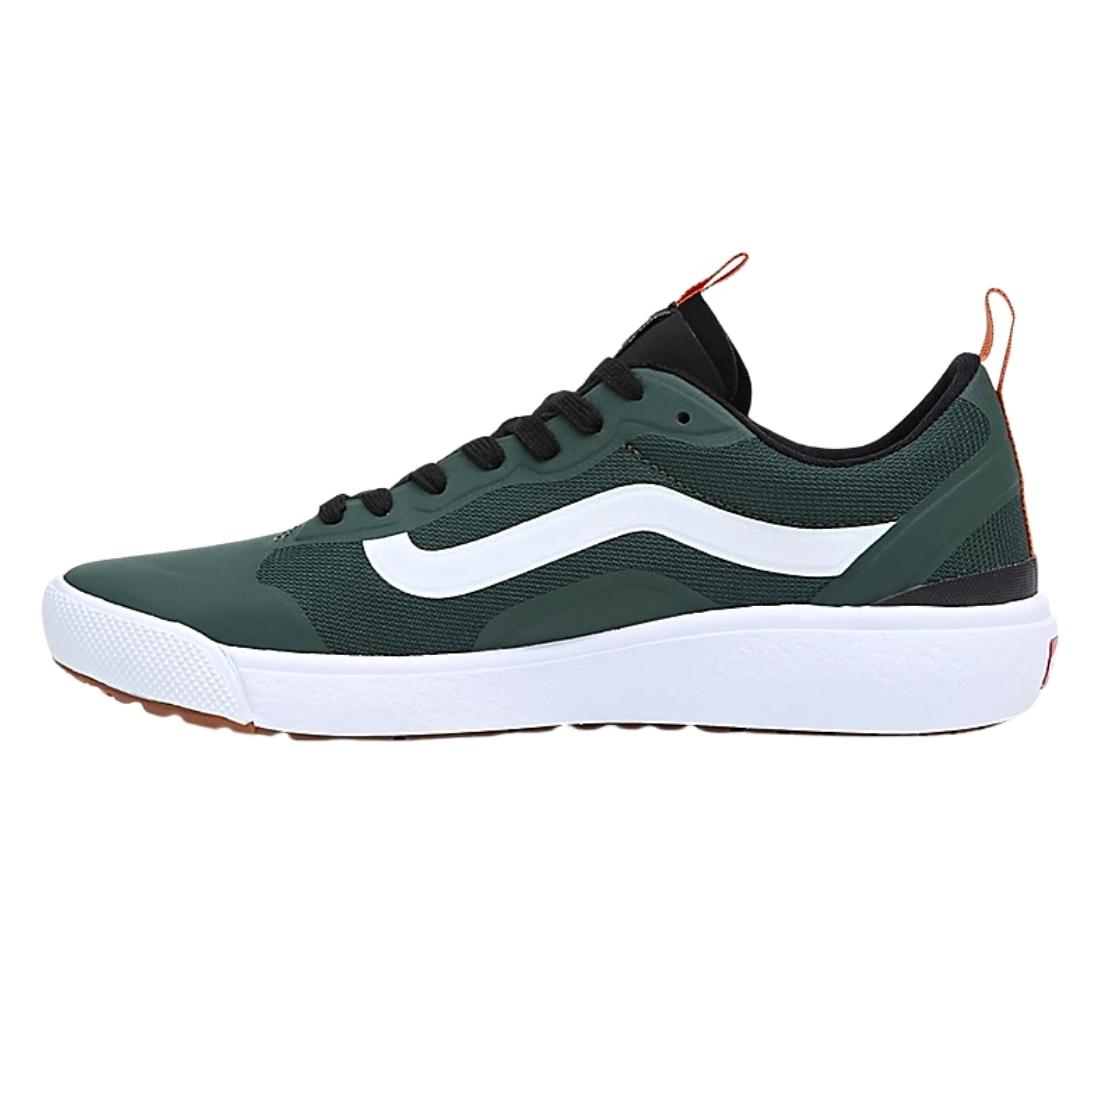 Vans Ultrarange Exo Shoes - Mountain View - Mens Running Shoes/Trainers by Vans